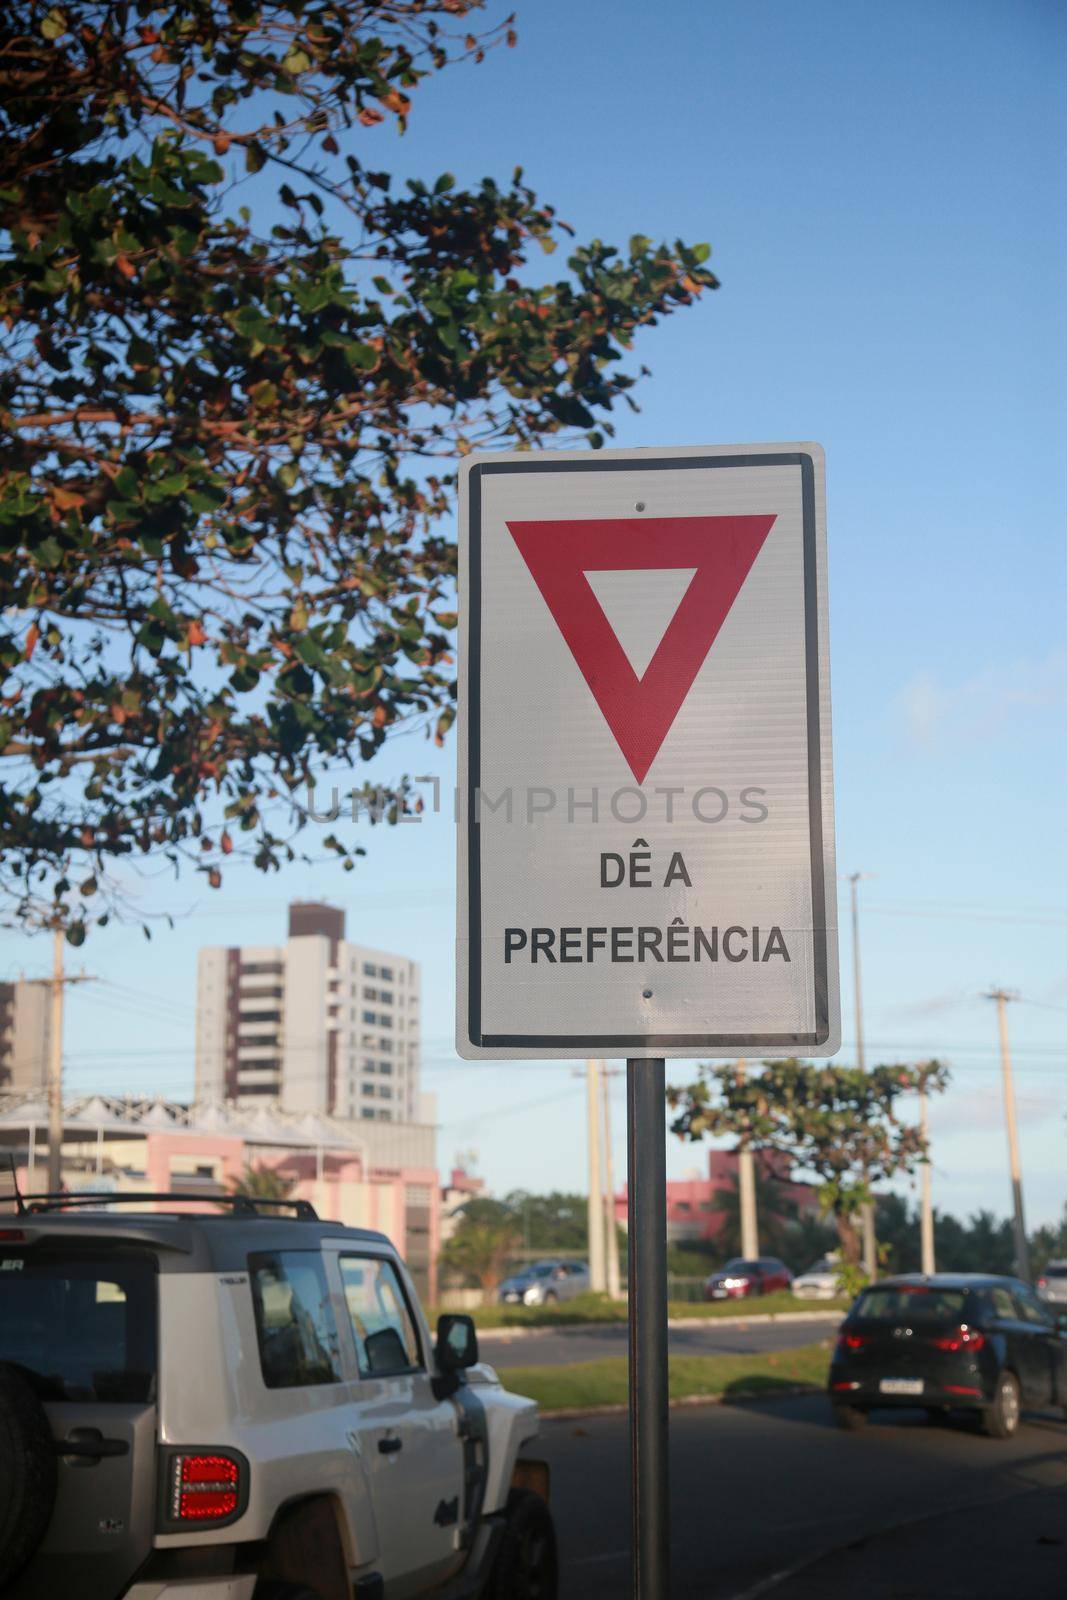 salvador, bahia, brazil - july 19, 2022: traffic signs indicative of give the preference on a street in the city of Salvador